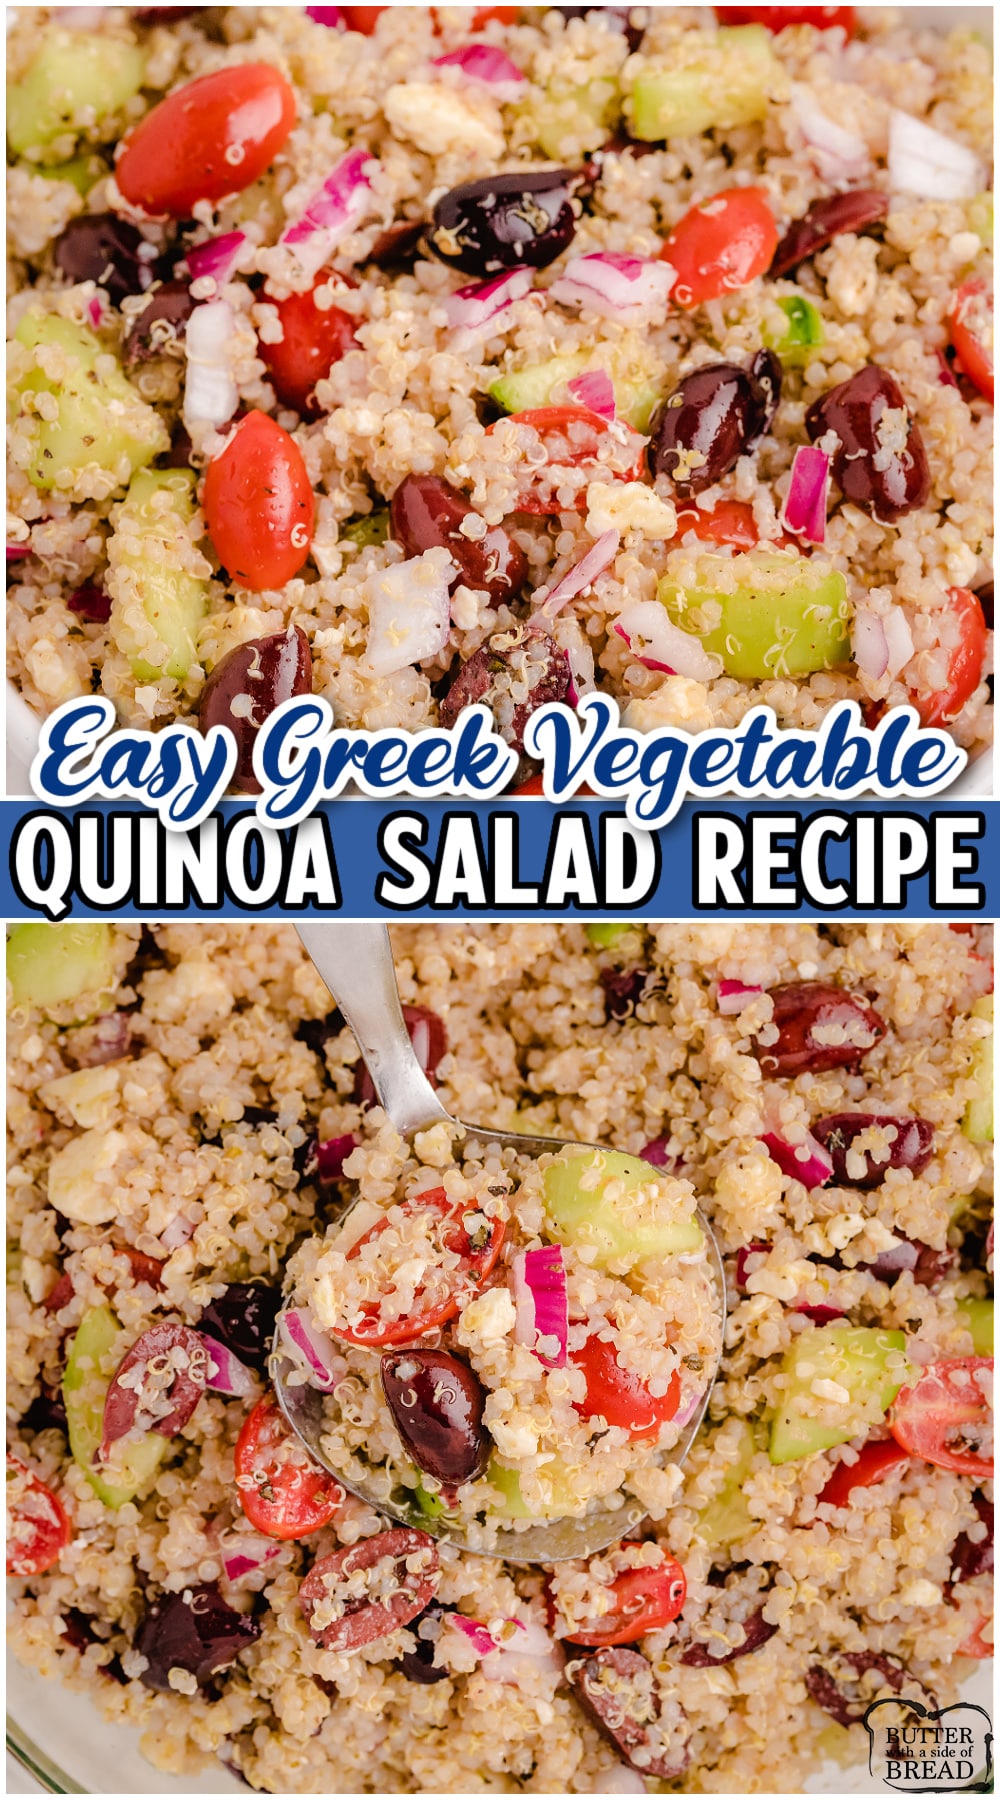 Greek Quinoa Salad is a healthy, flavorful salad made with quinoa, cucumbers, feta, tomatoes & olives! This Mediterranean quinoa salad is a great side dish or lunch!